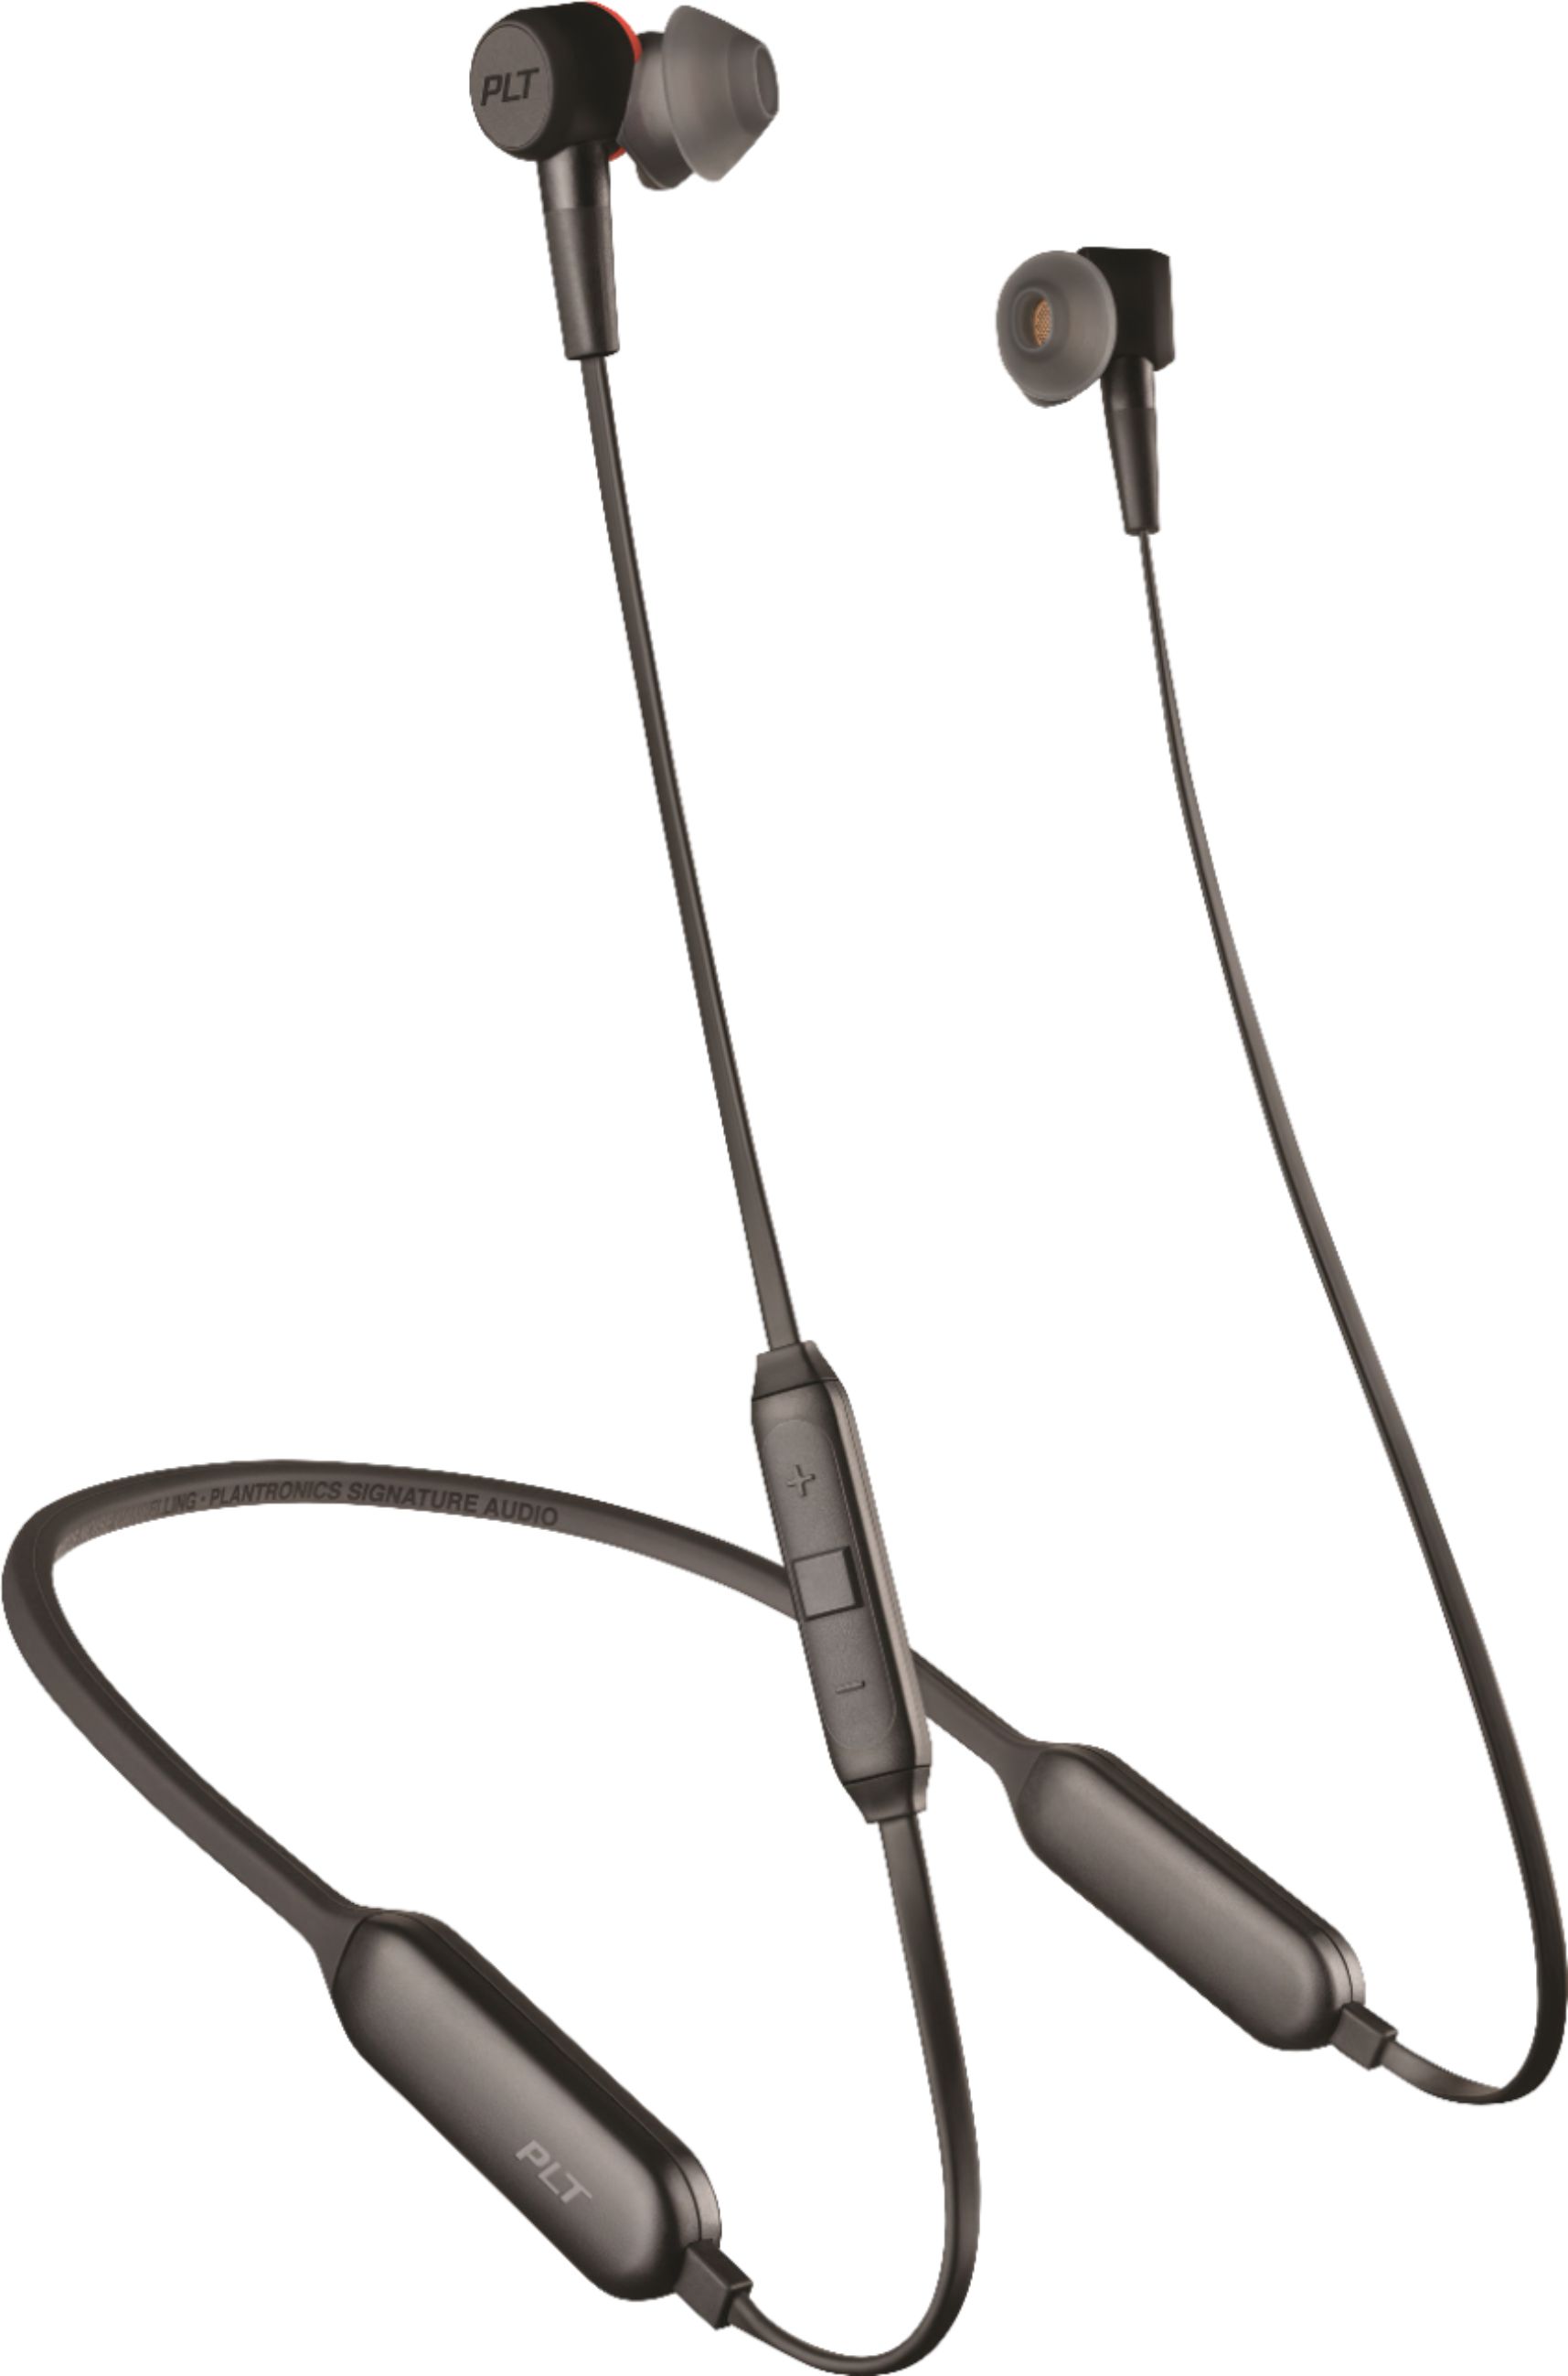 Customer Reviews Plantronics Backbeat Go Wireless Noise Cancelling